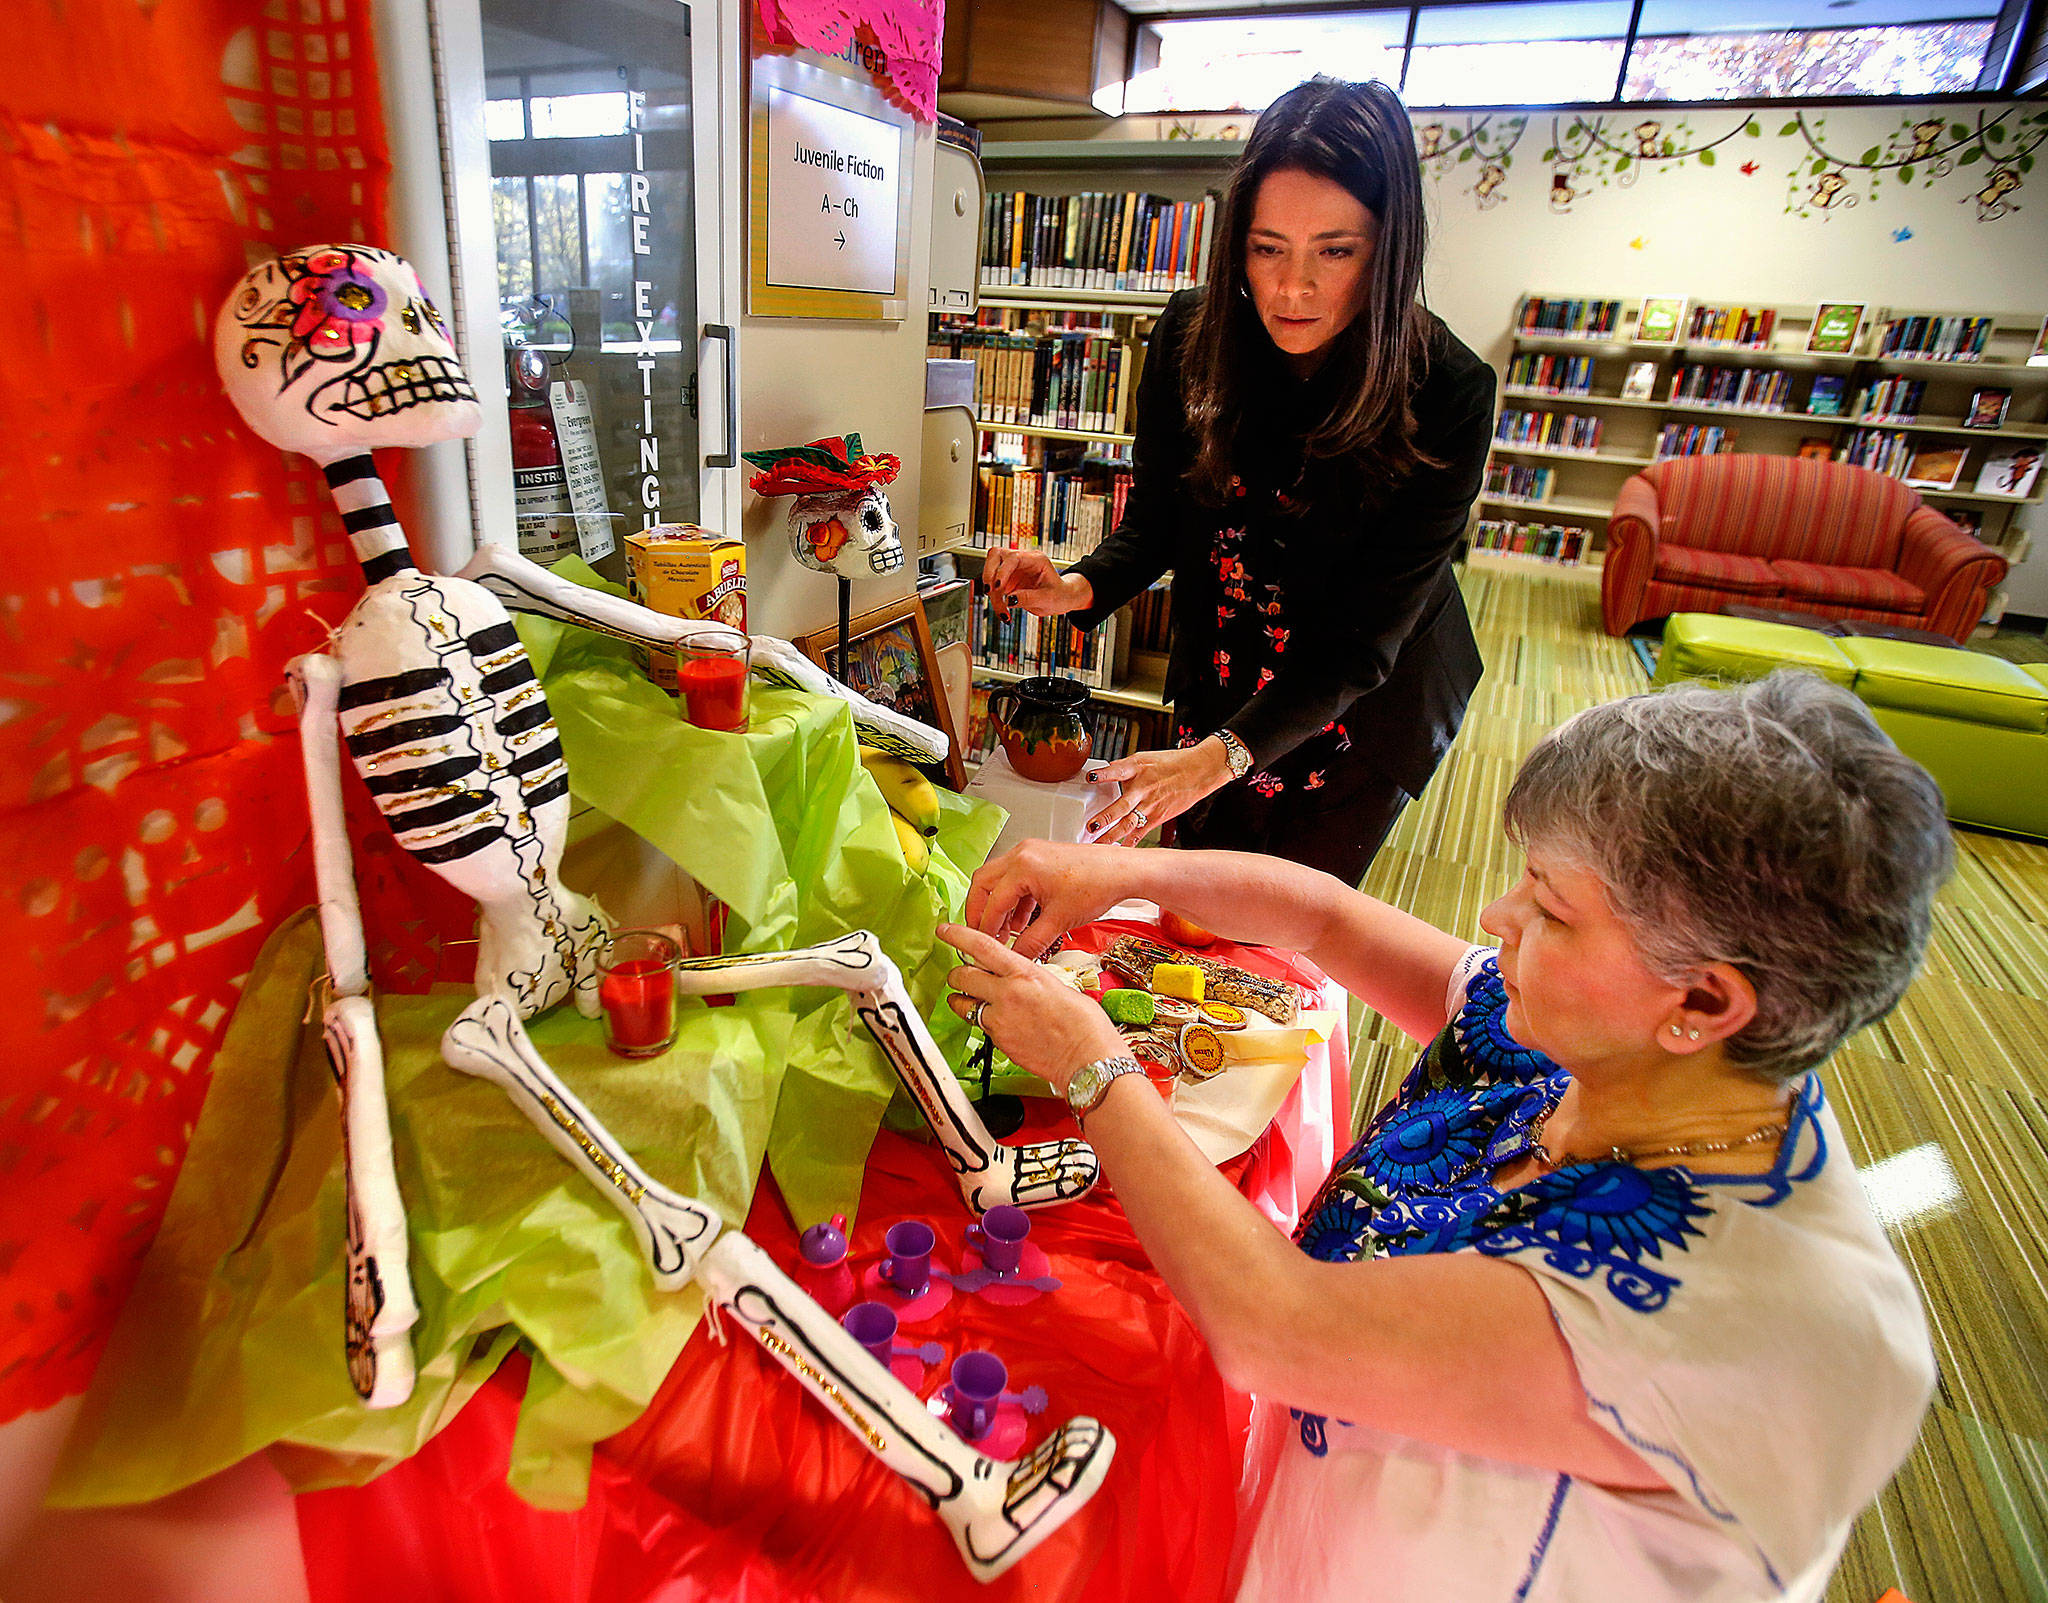 At Lynnwood Library, Julieta Altamirano-Crosby (left) and Maria Casey create a Day of the Dead display in the children’s area Tuesday. The women created a larger adult version as well. (Dan Bates / The Herald)